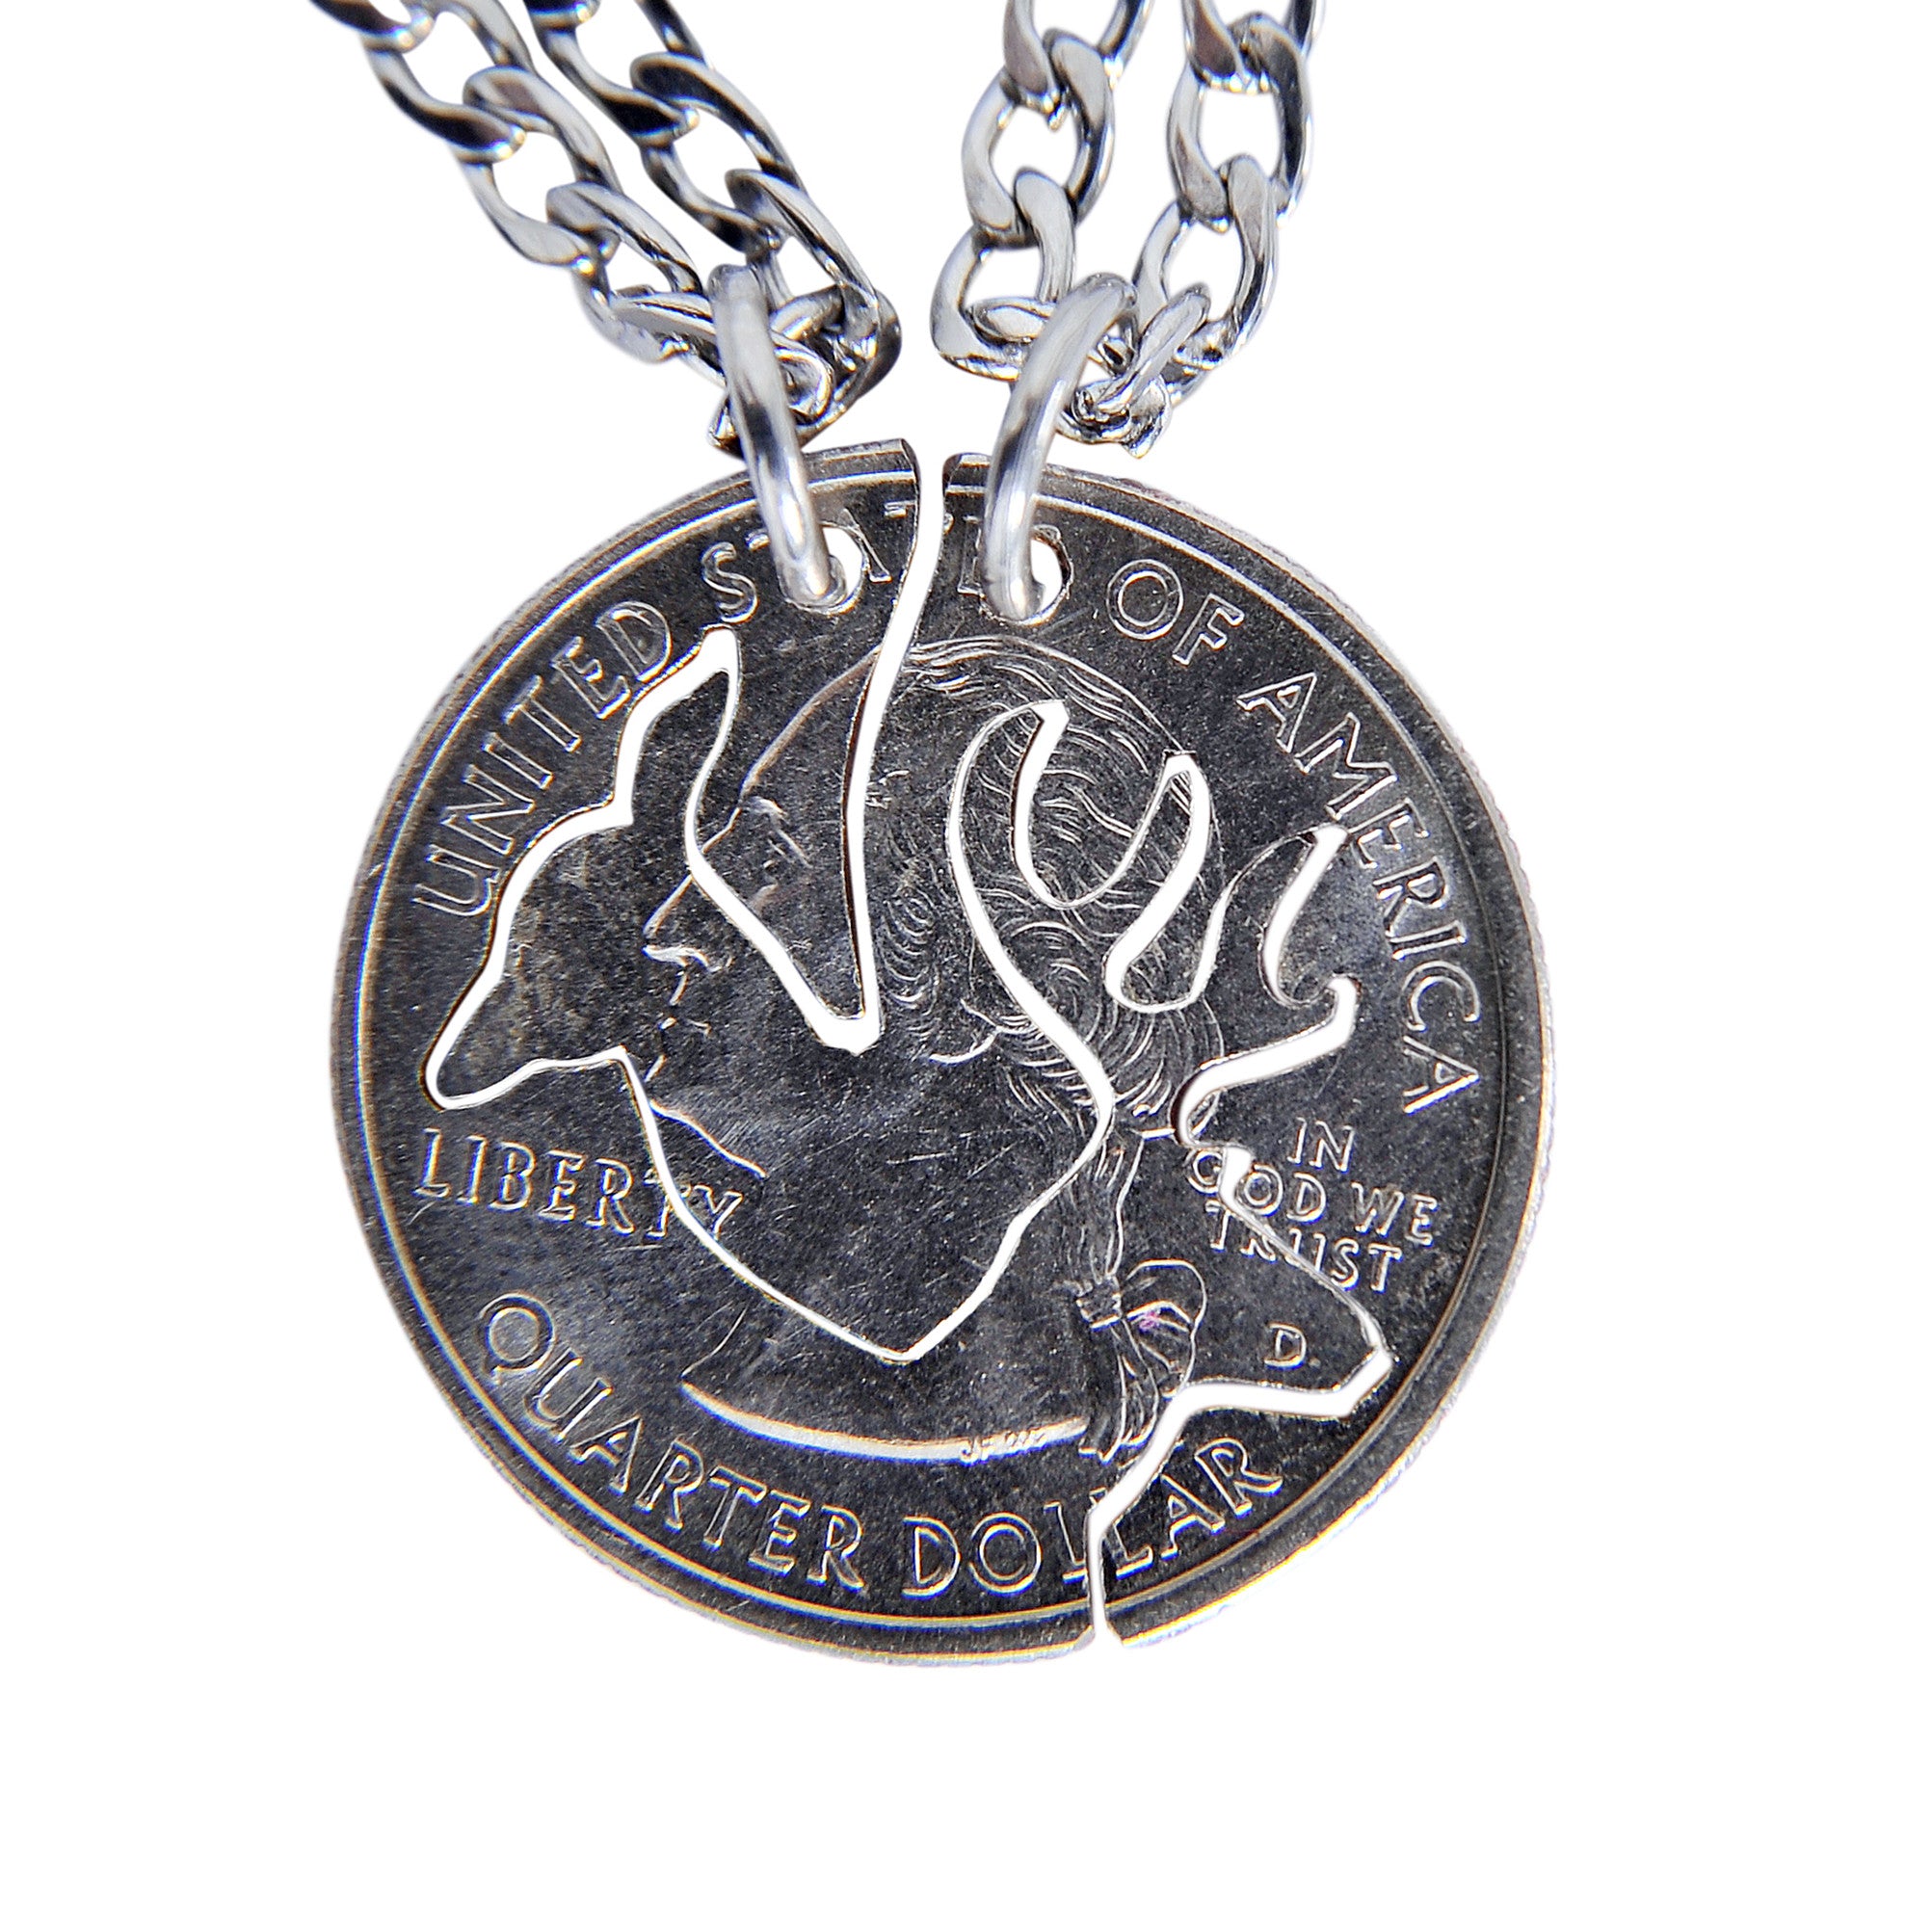 Hand Coin Cut Buck and Doe Interlocking Necklace